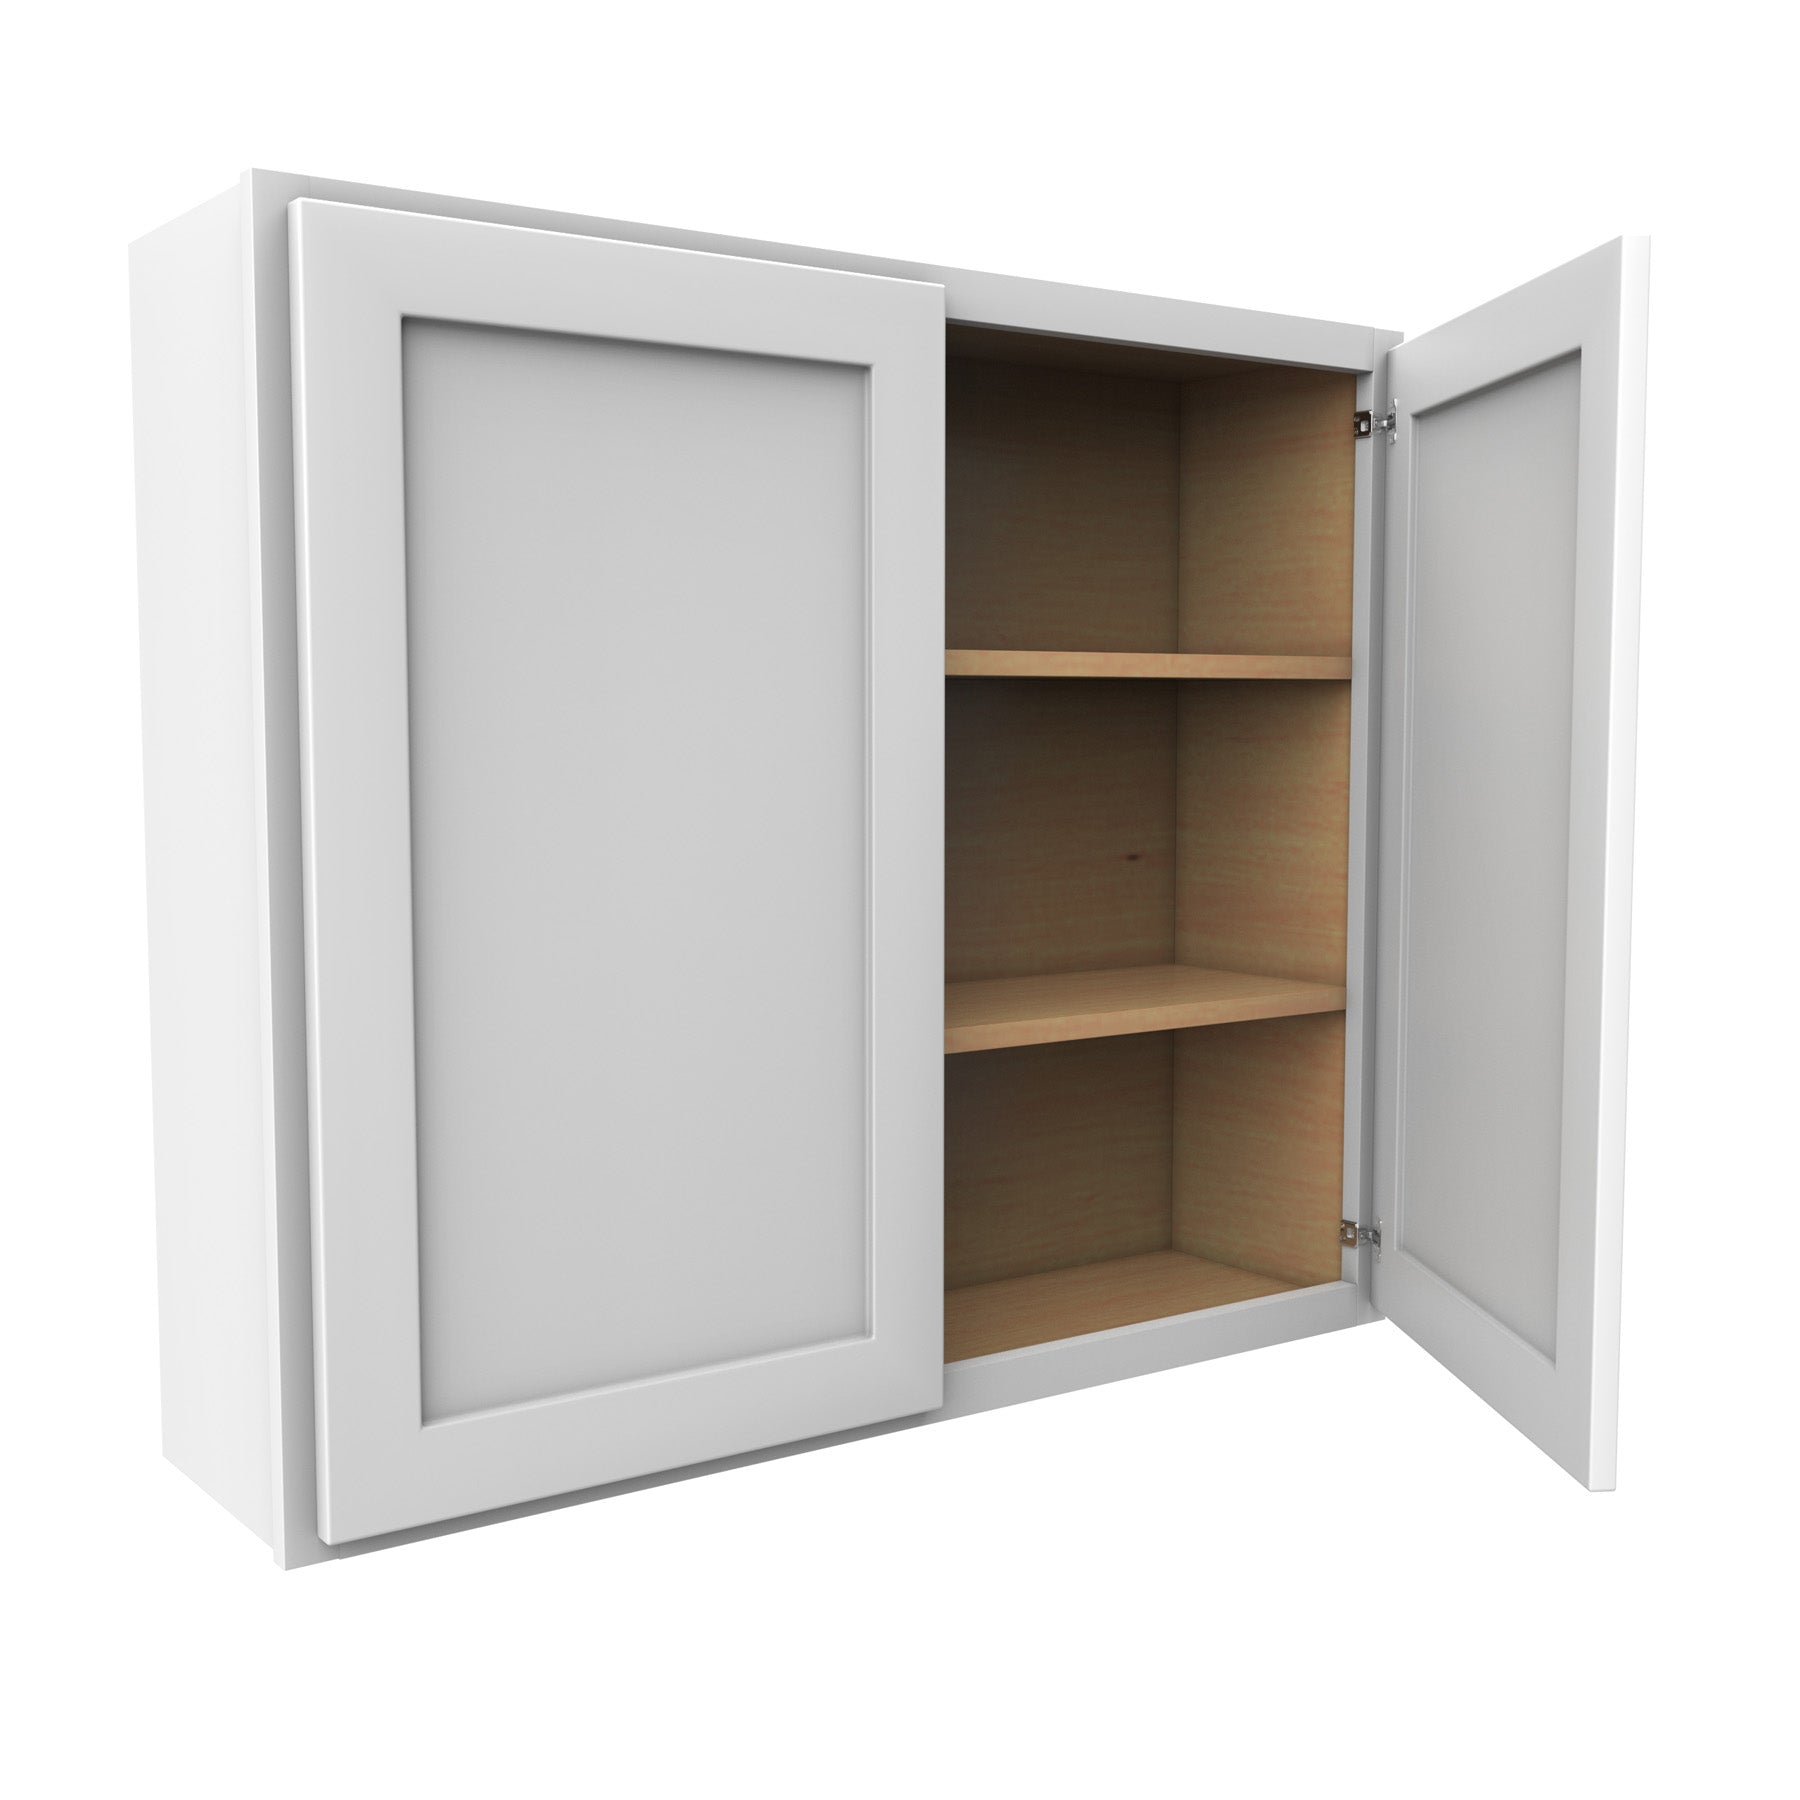 36 Inch High Double Door Wall Cabinet - Luxor White Shaker- Ready To Assemble, 42"W x 36"H x 12"D